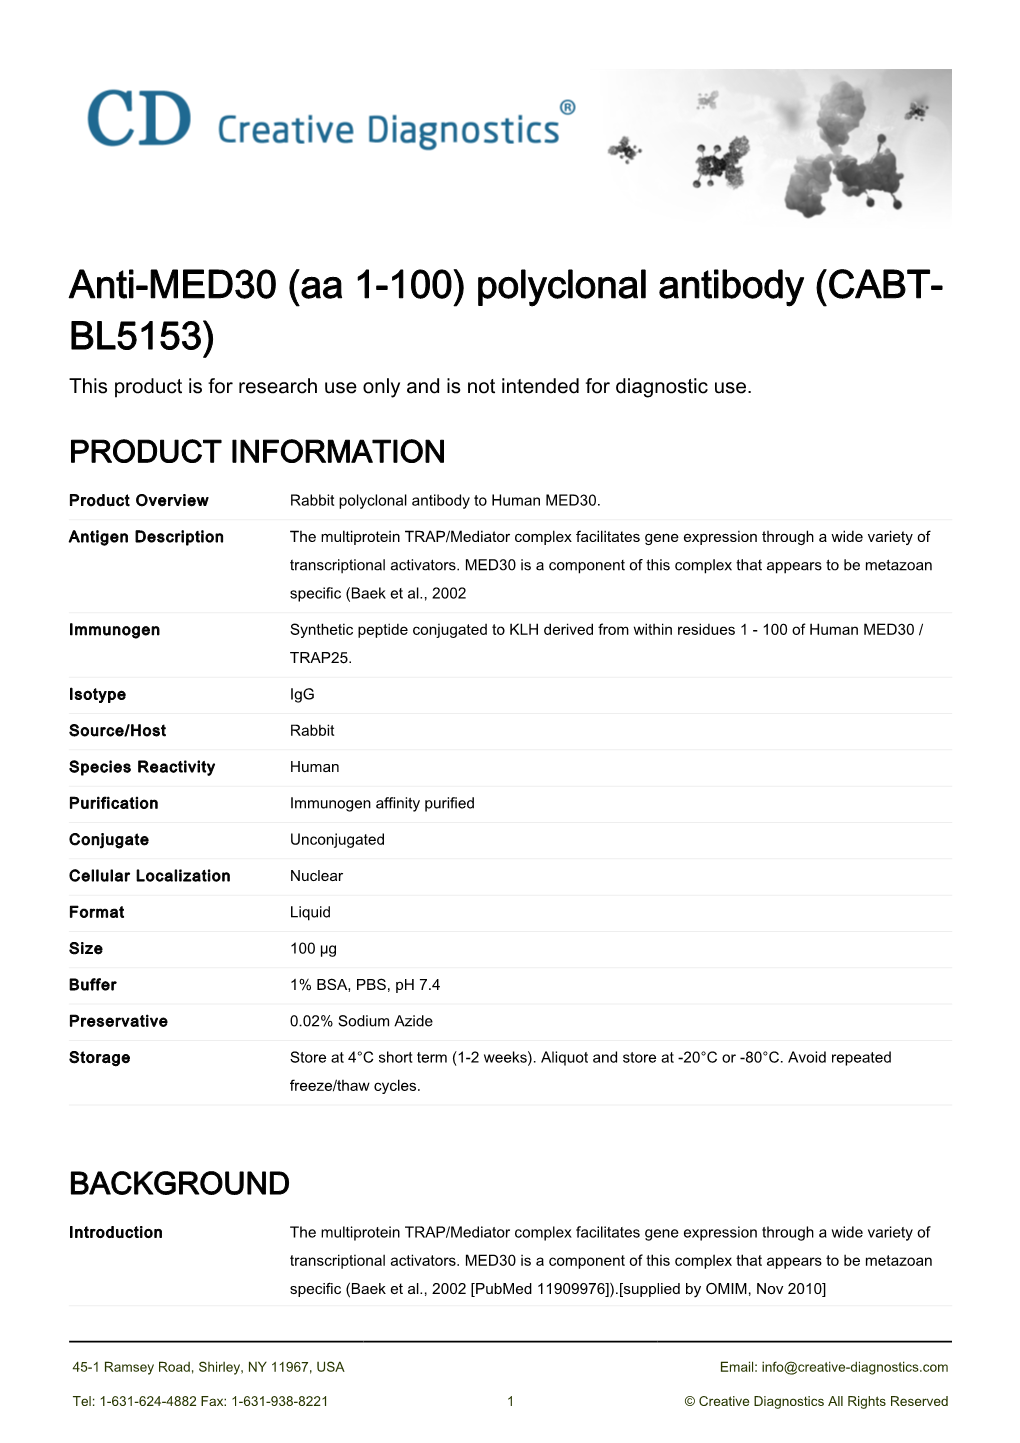 Anti-MED30 (Aa 1-100) Polyclonal Antibody (CABT- BL5153) This Product Is for Research Use Only and Is Not Intended for Diagnostic Use